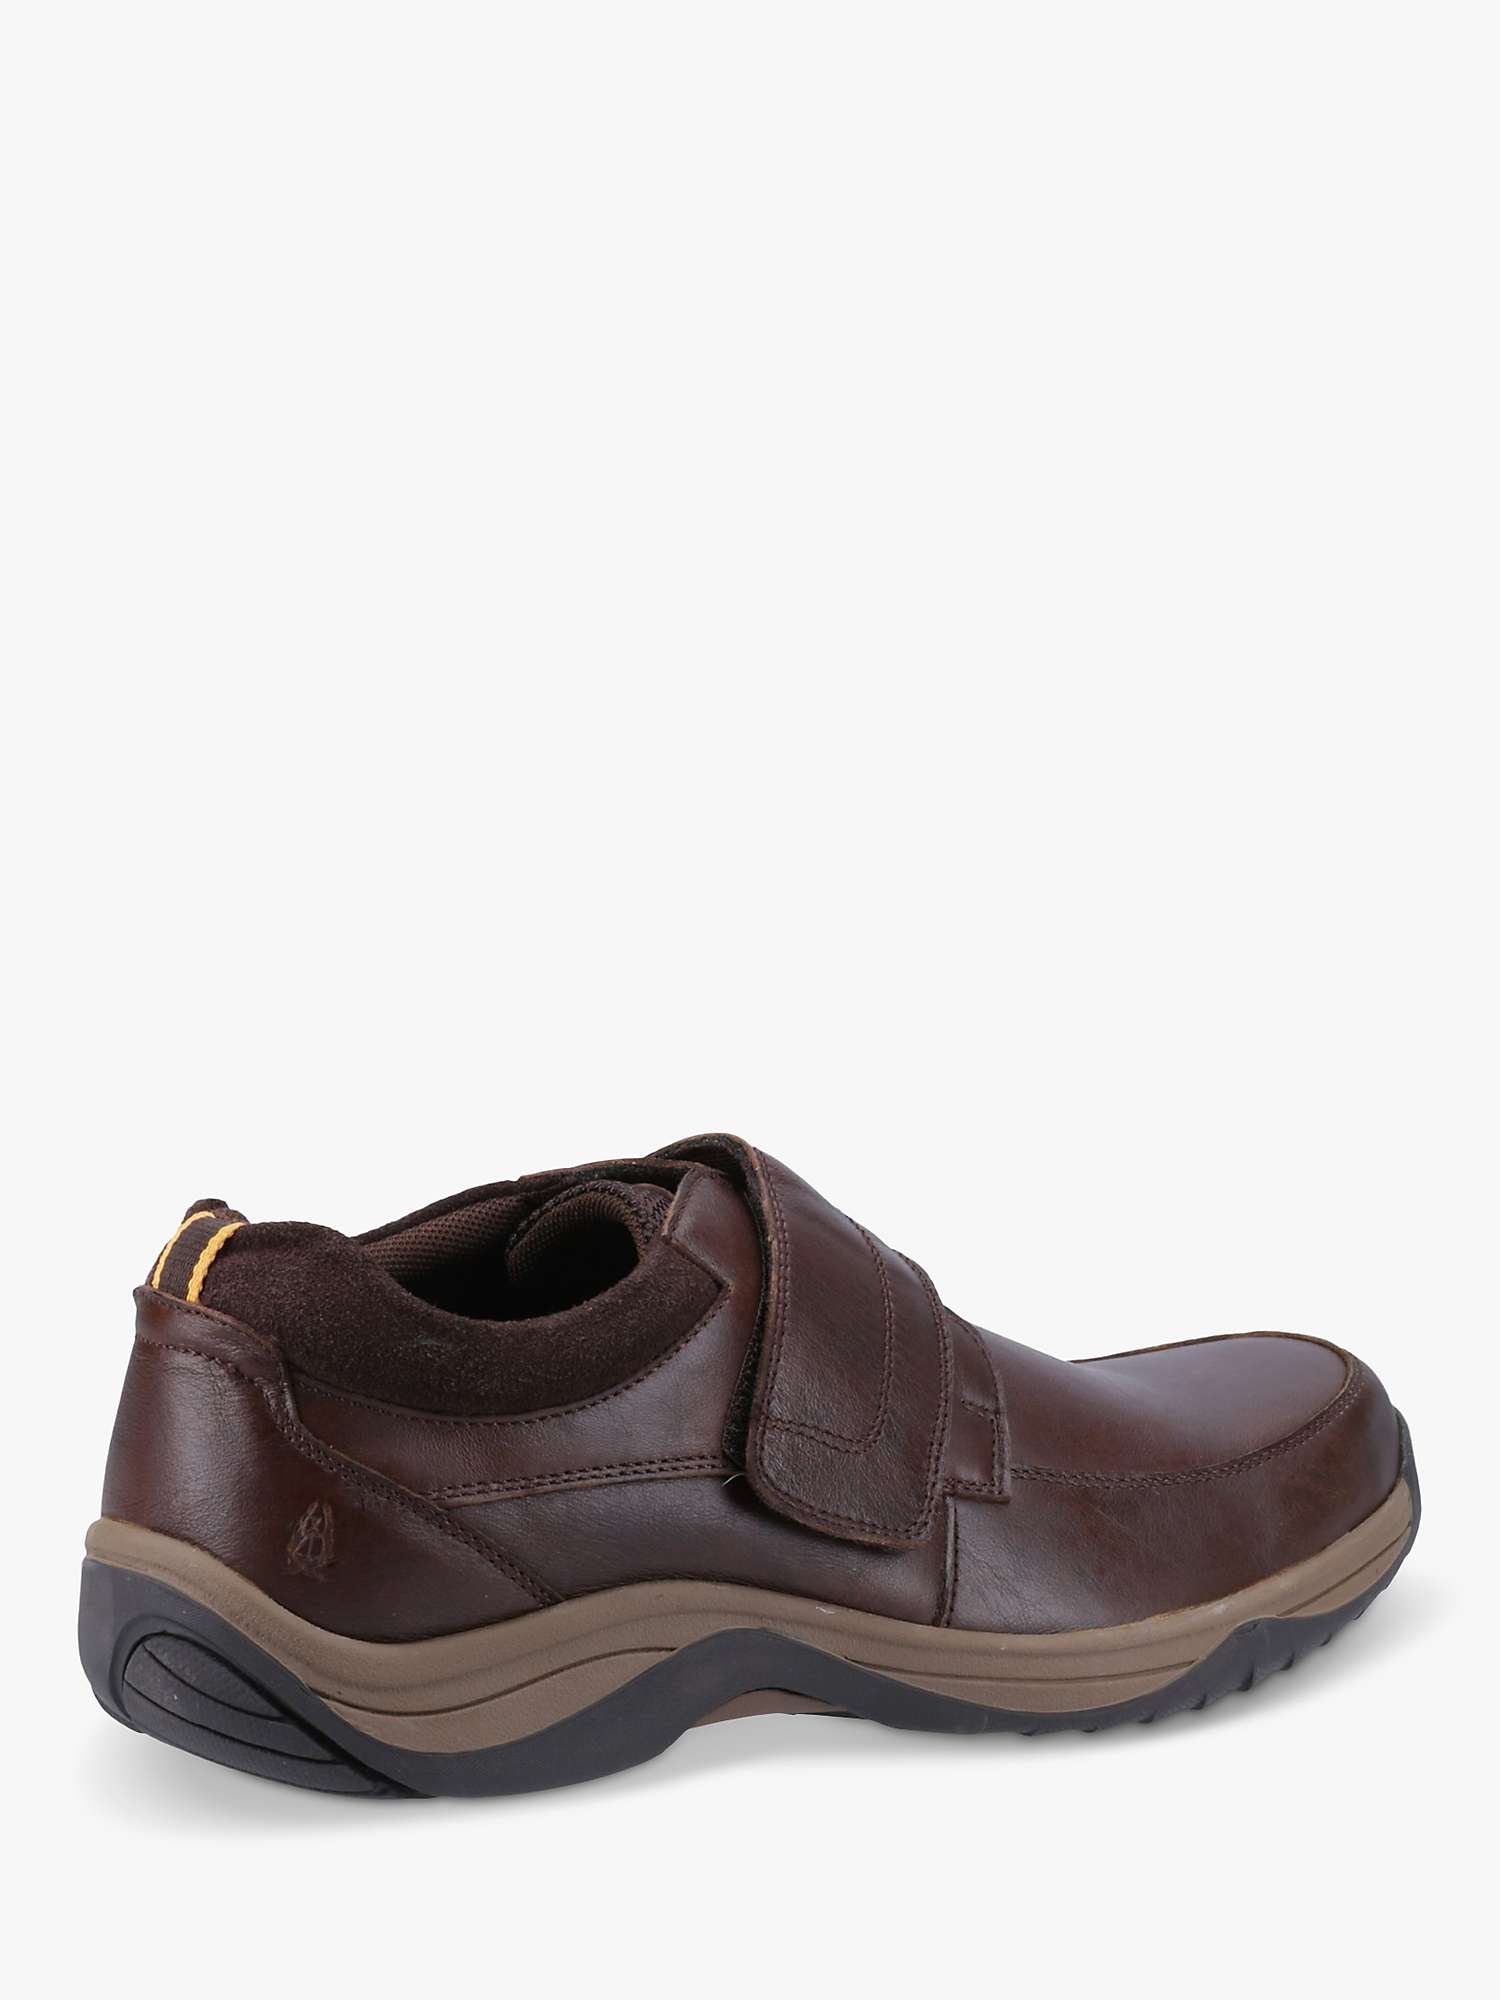 Buy Hush Puppies Douglas Leather Shoes Online at johnlewis.com